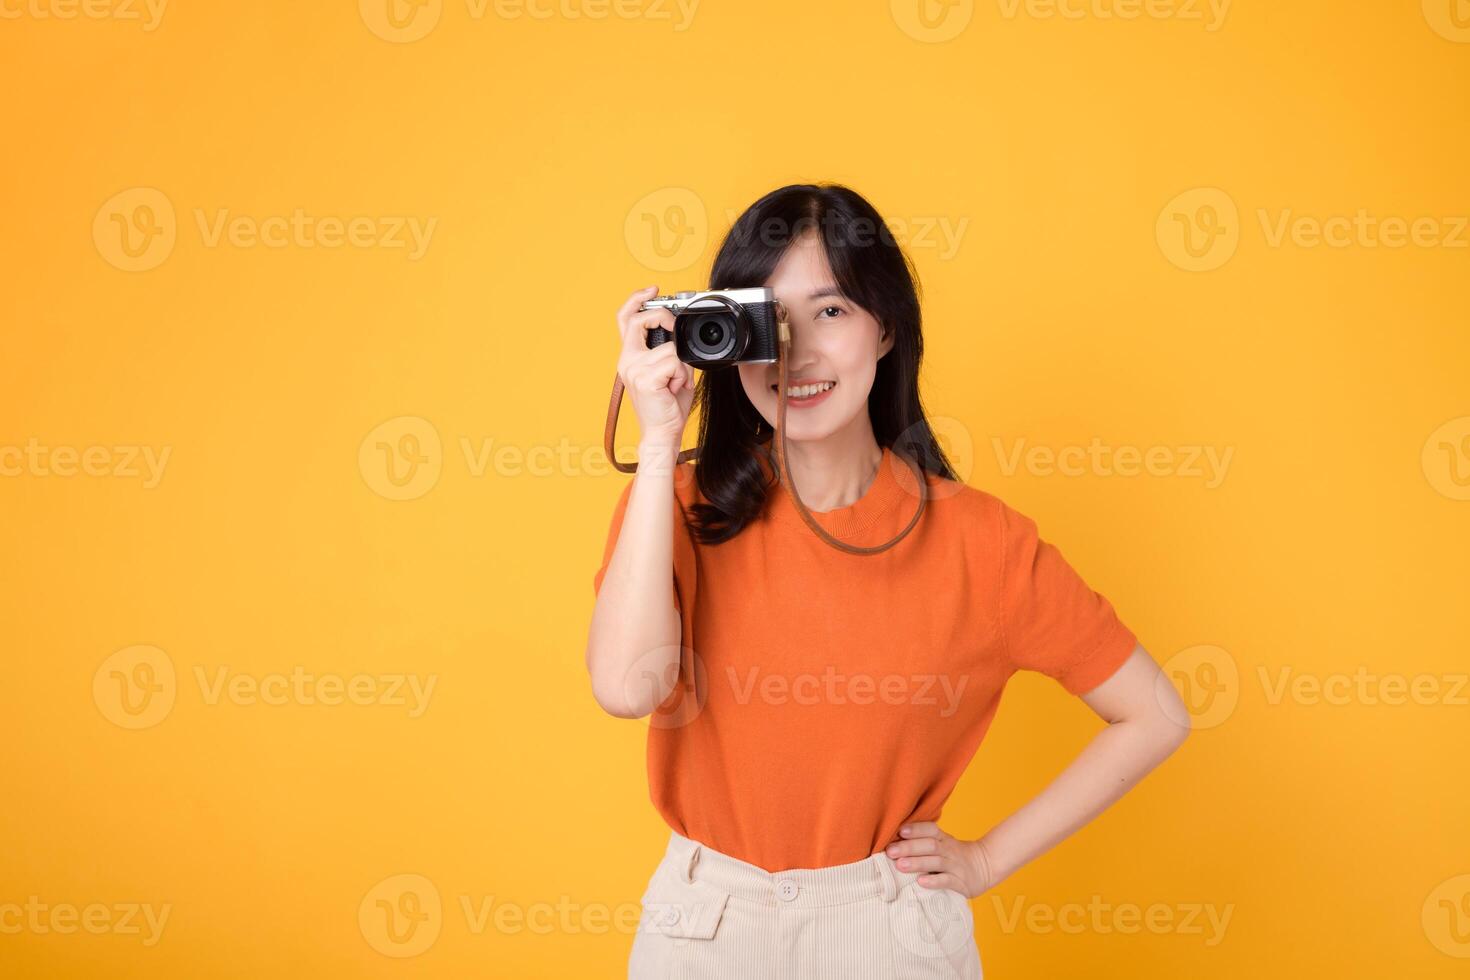 Vibrant woman with camera isolated on yellow background, showing the adventure of exploring new places on her vacation. photo